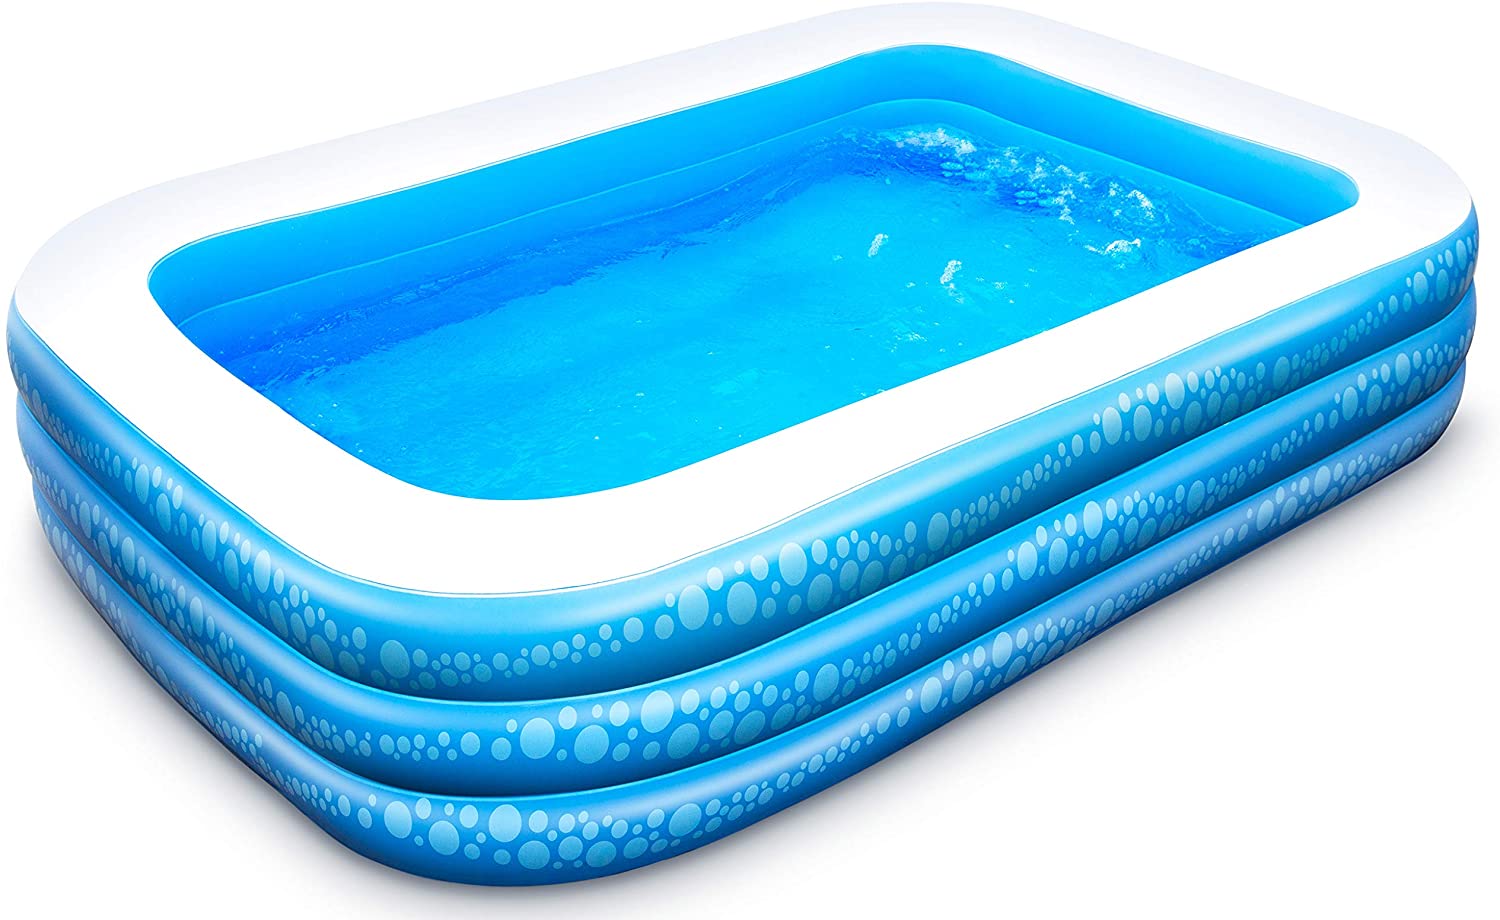 Inflatable Pool Reviews